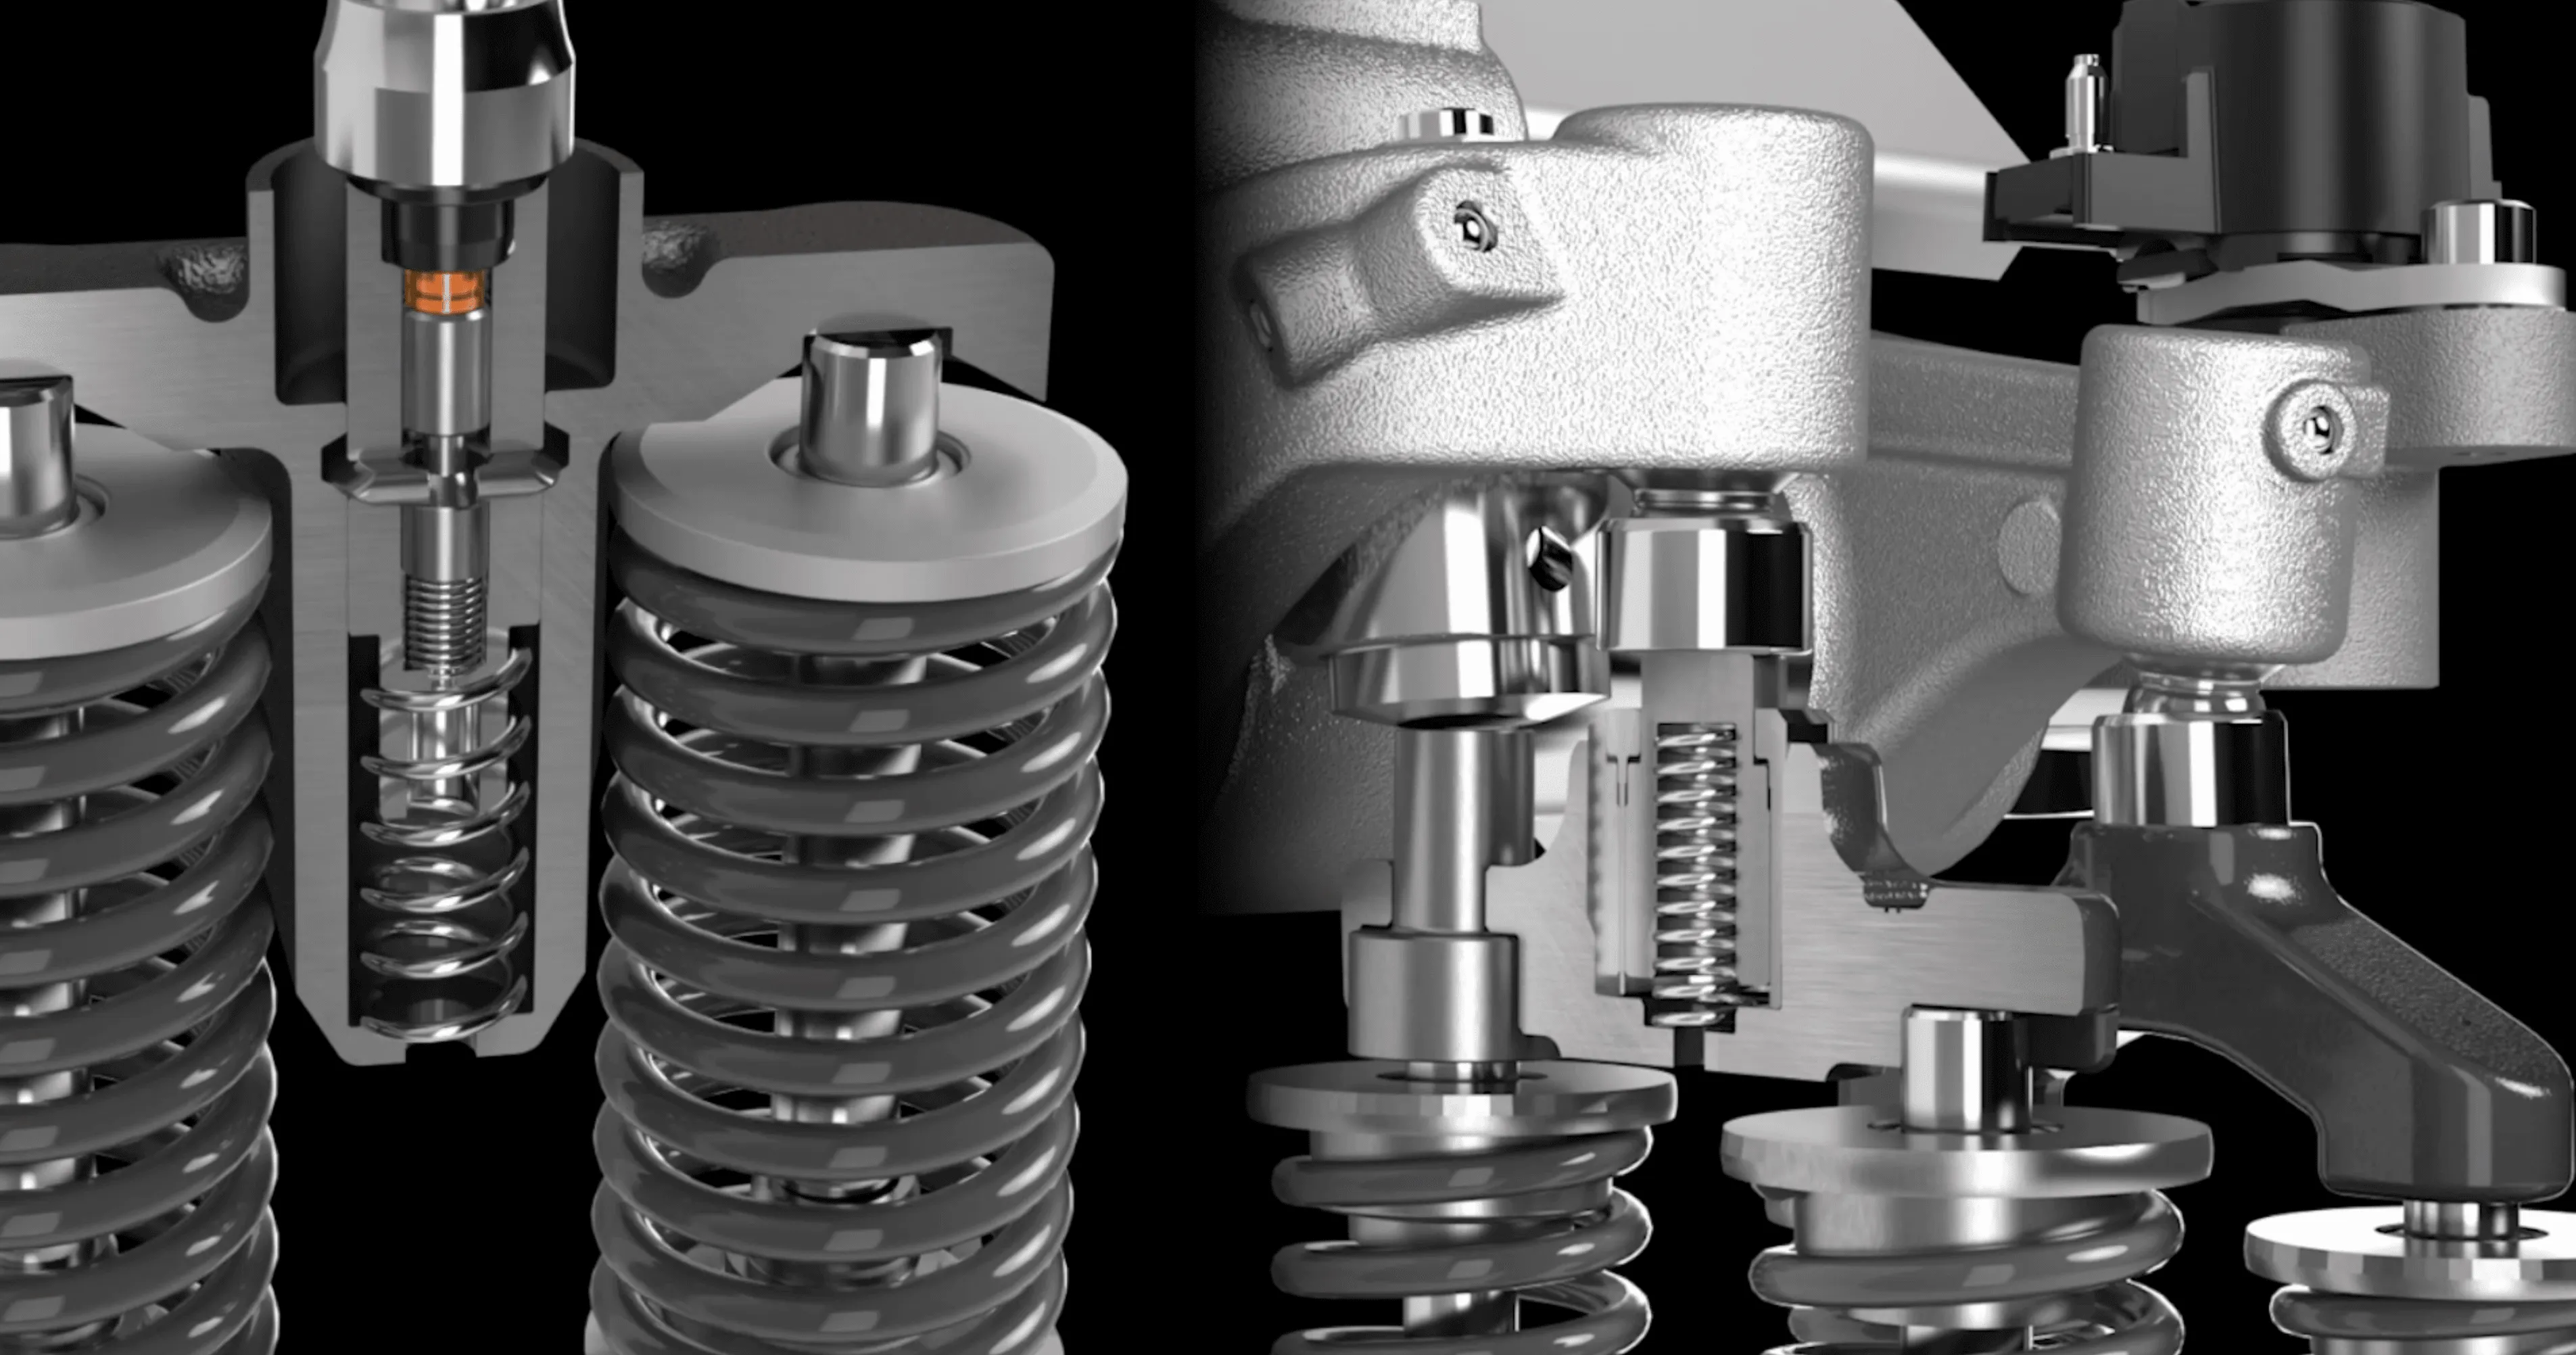 3D rendering of an automotive engine valve mechanism, highlighting the camshaft, valves, and springs.